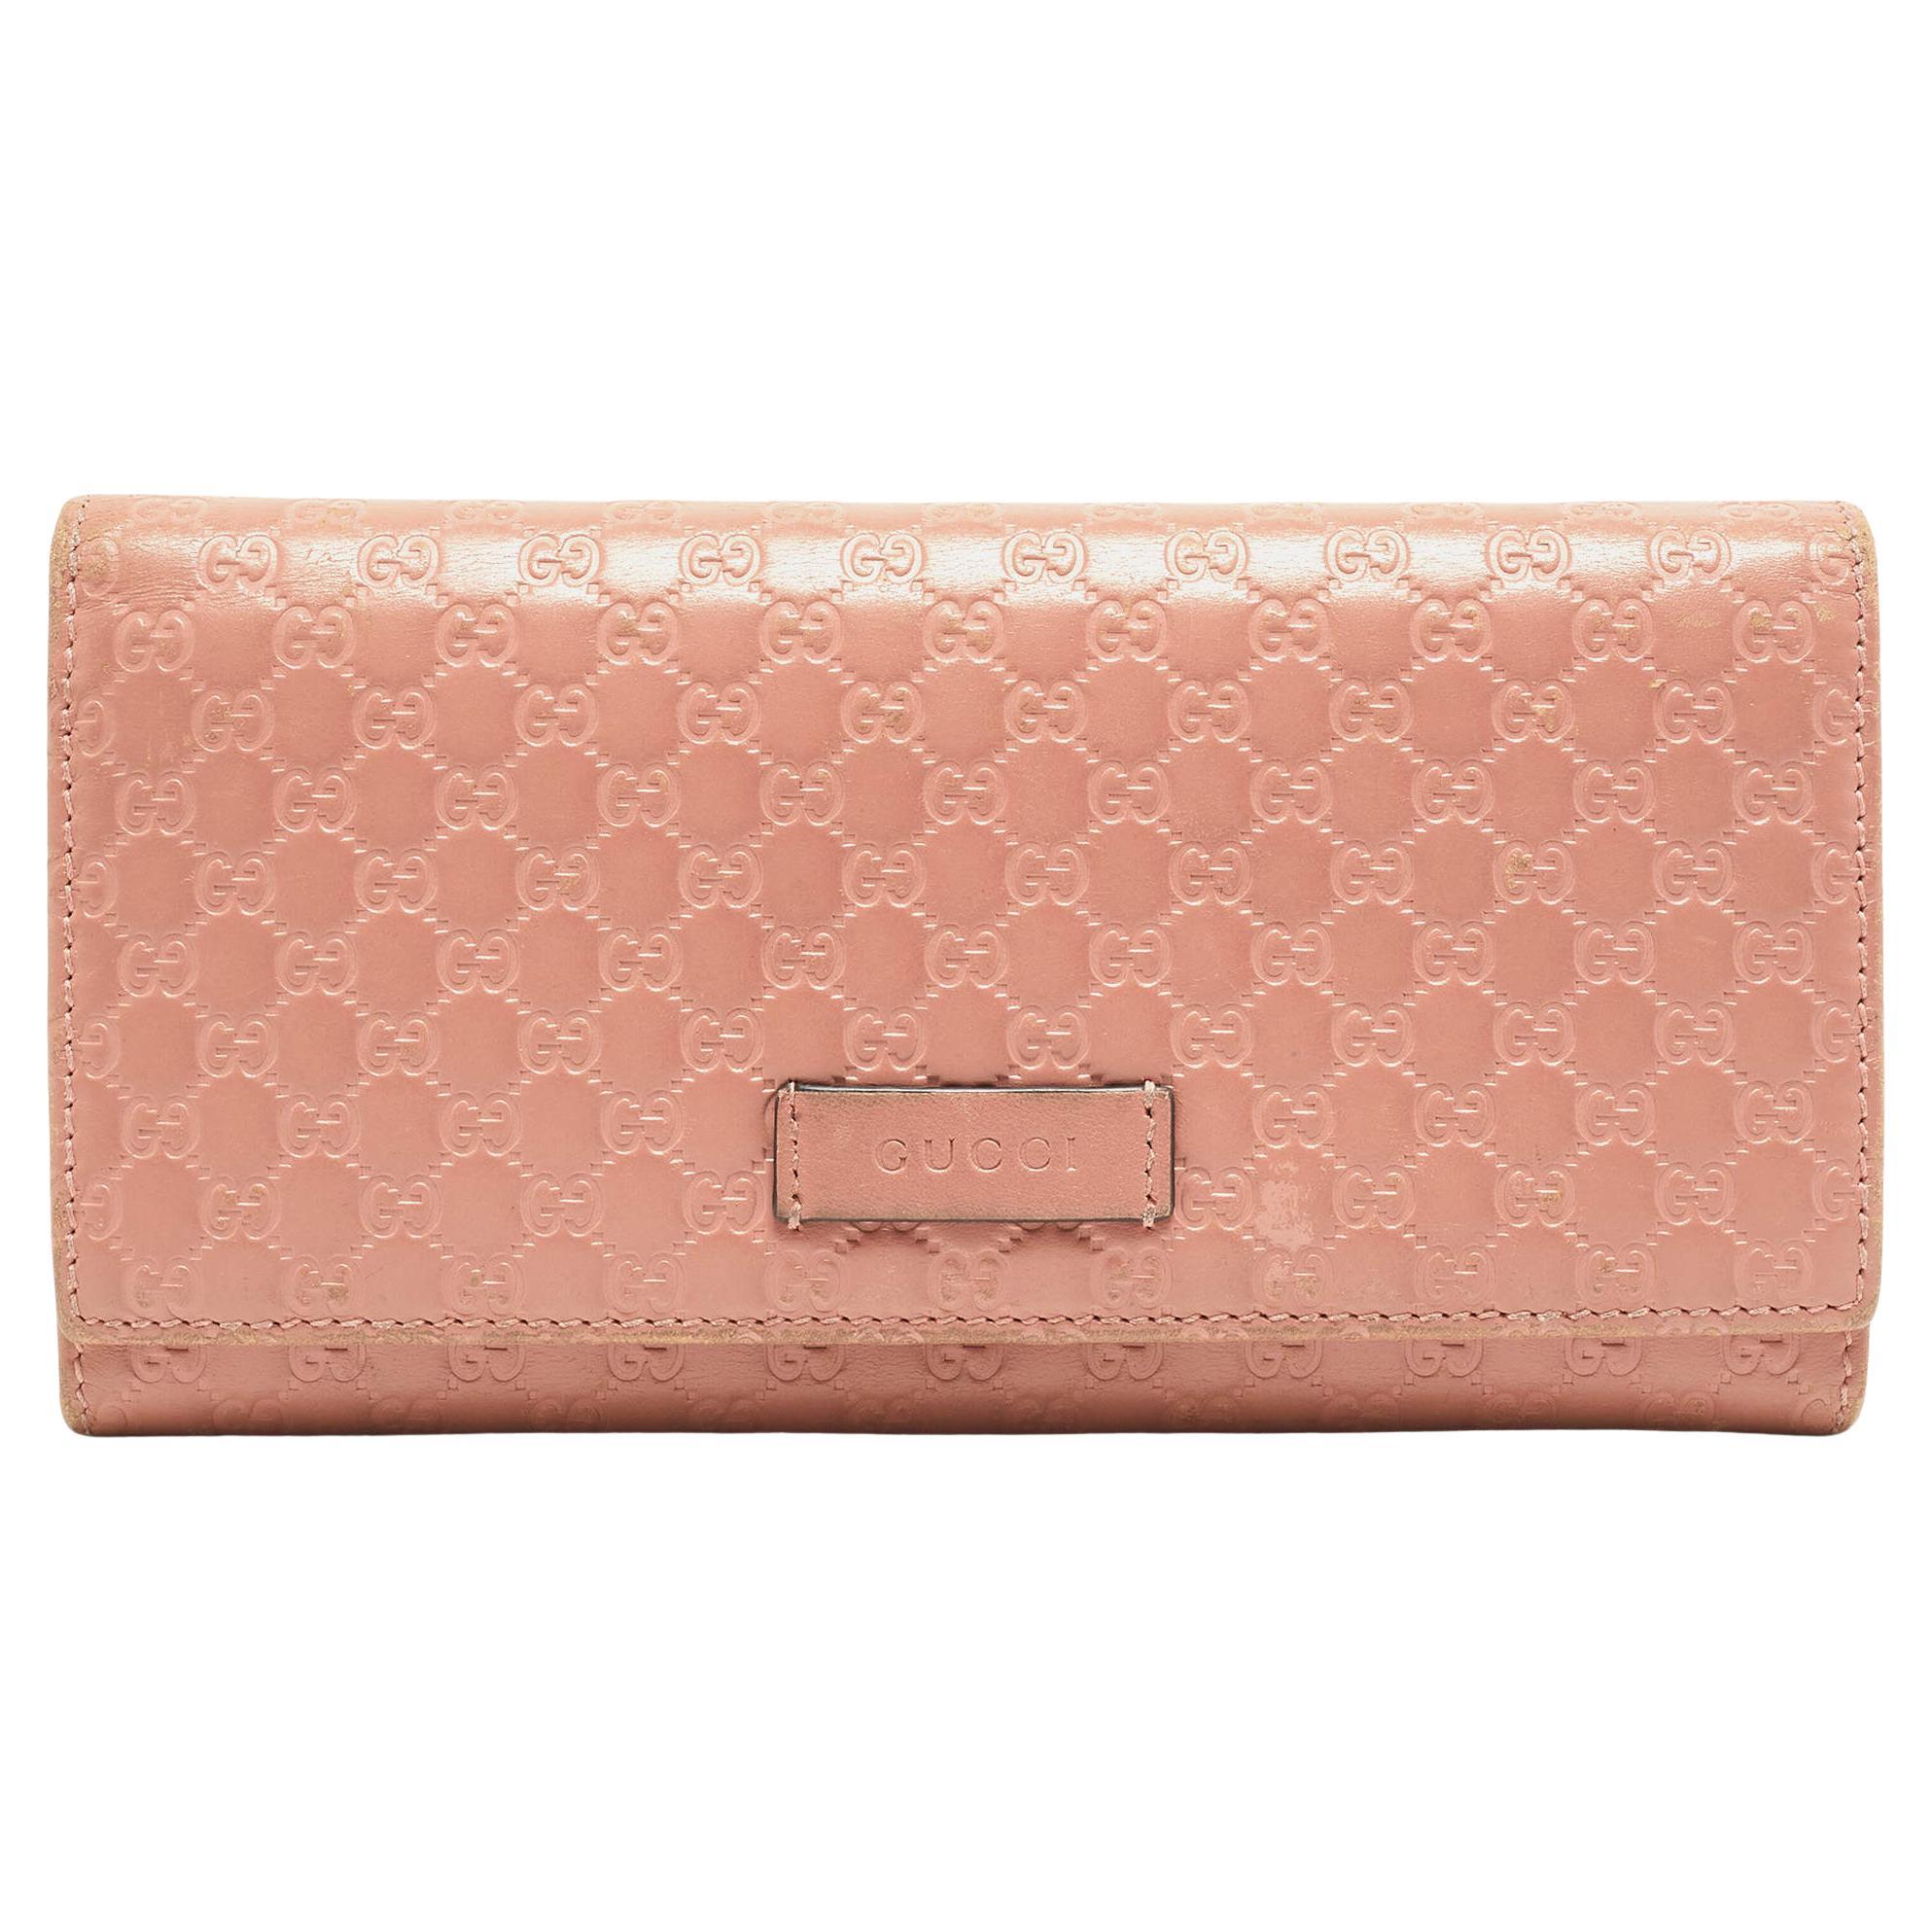 Gucci Pink Microgucissima Leather Flap Continental Wallet